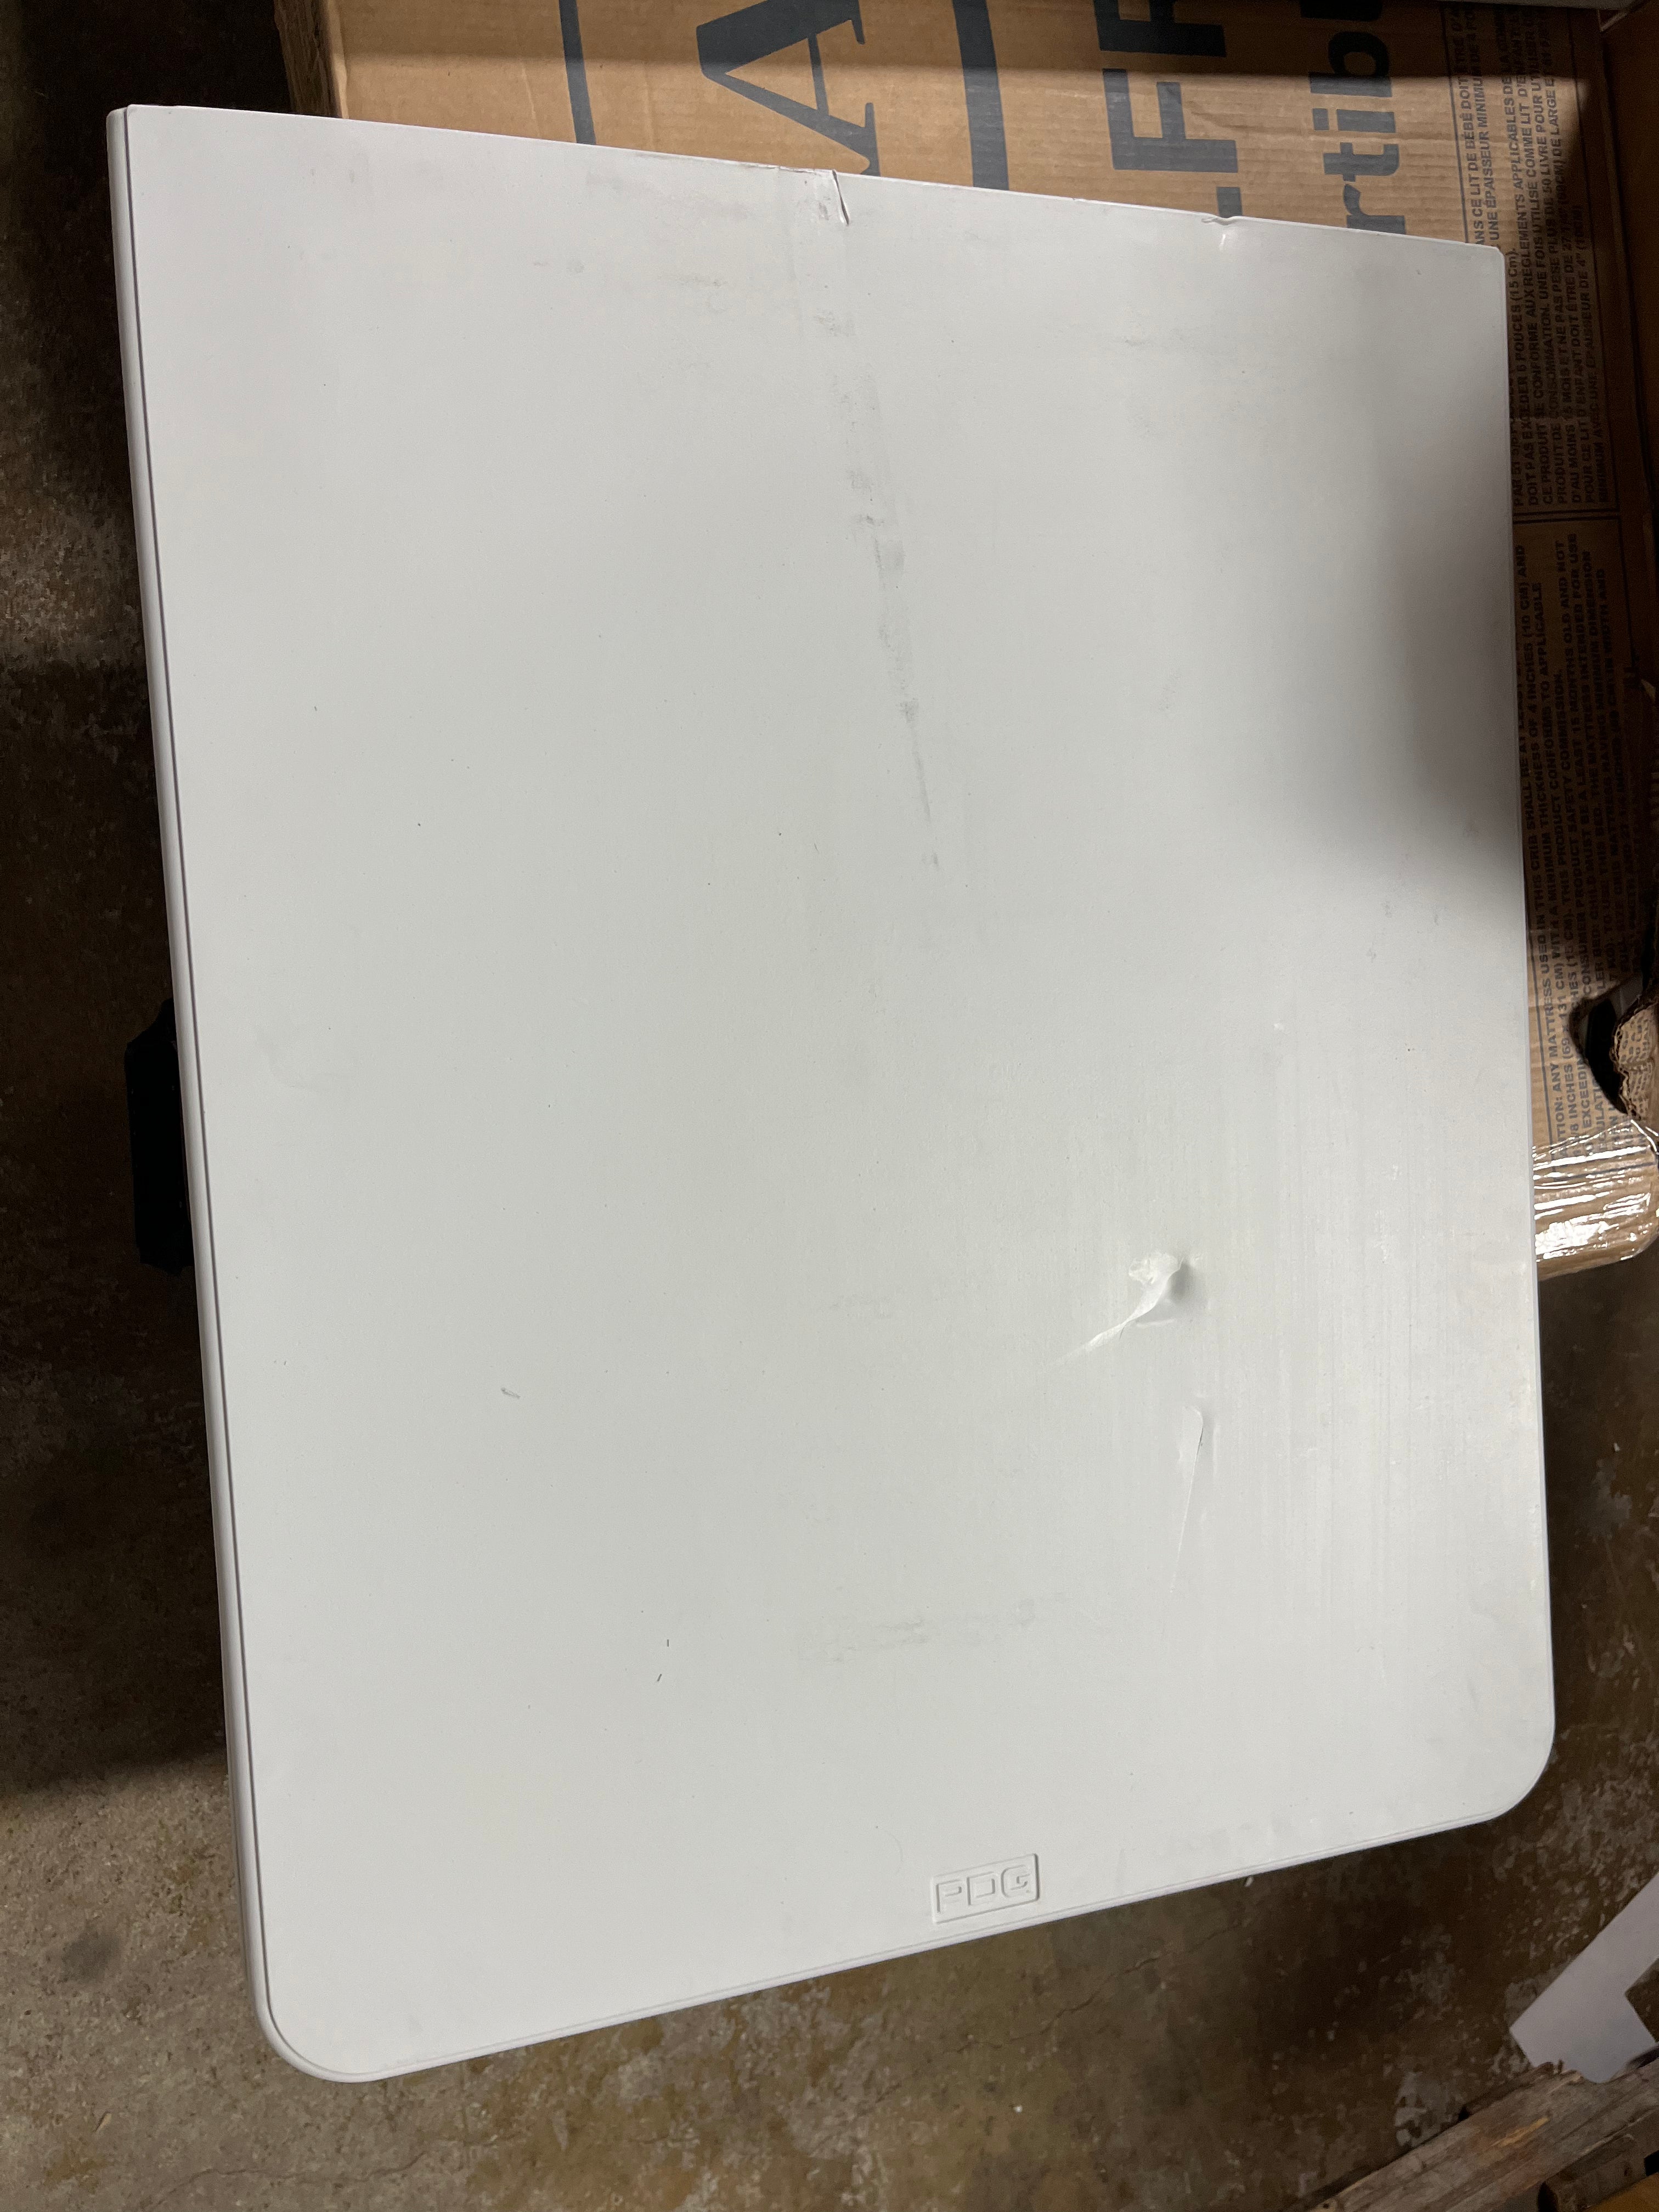 Folding Banquet Table Off-White